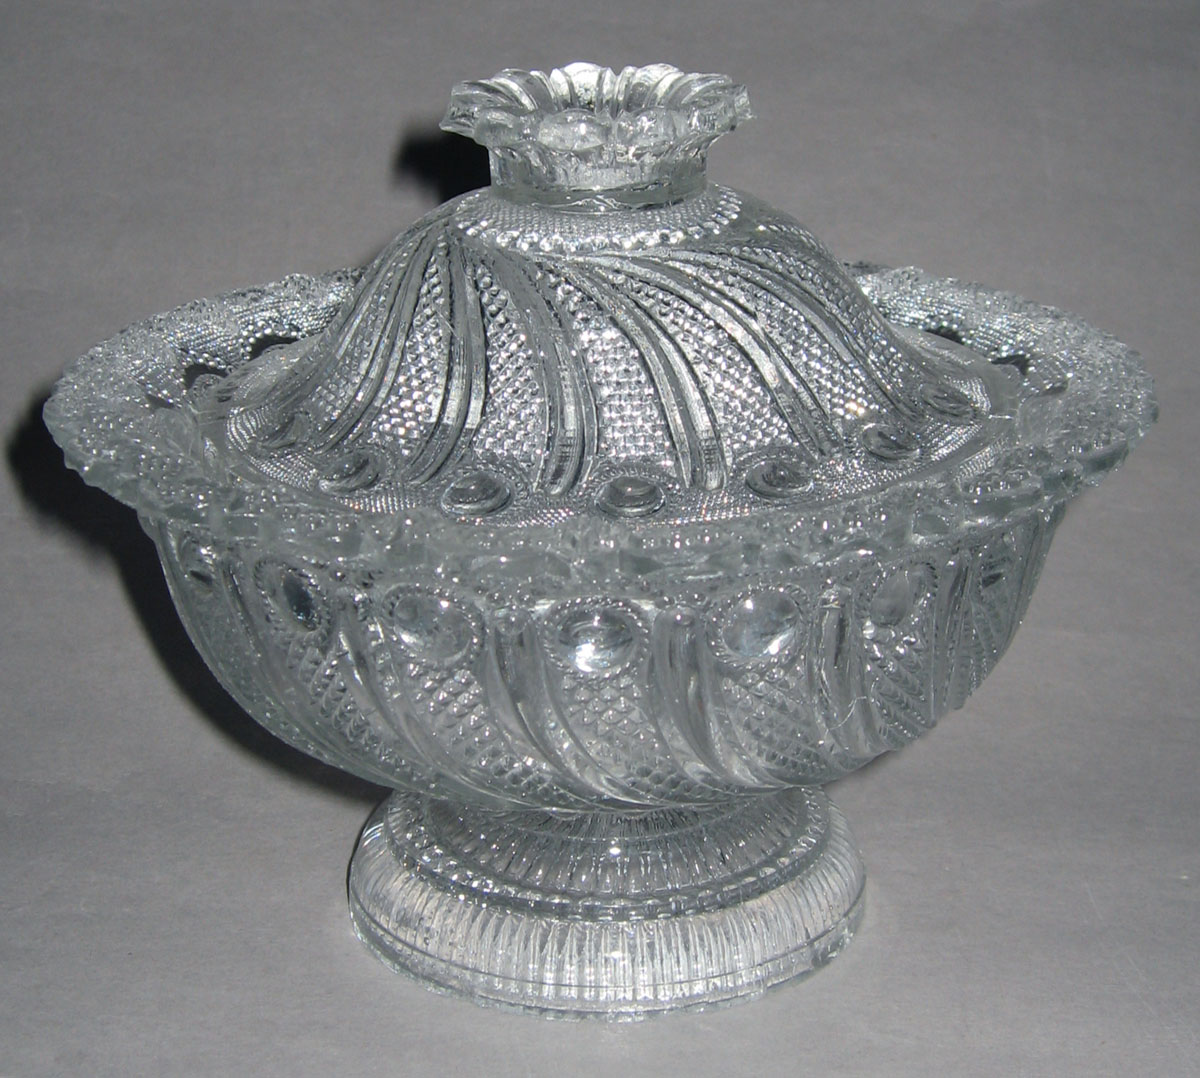 1974.0078 A, B Colorless lead glass covered bowl